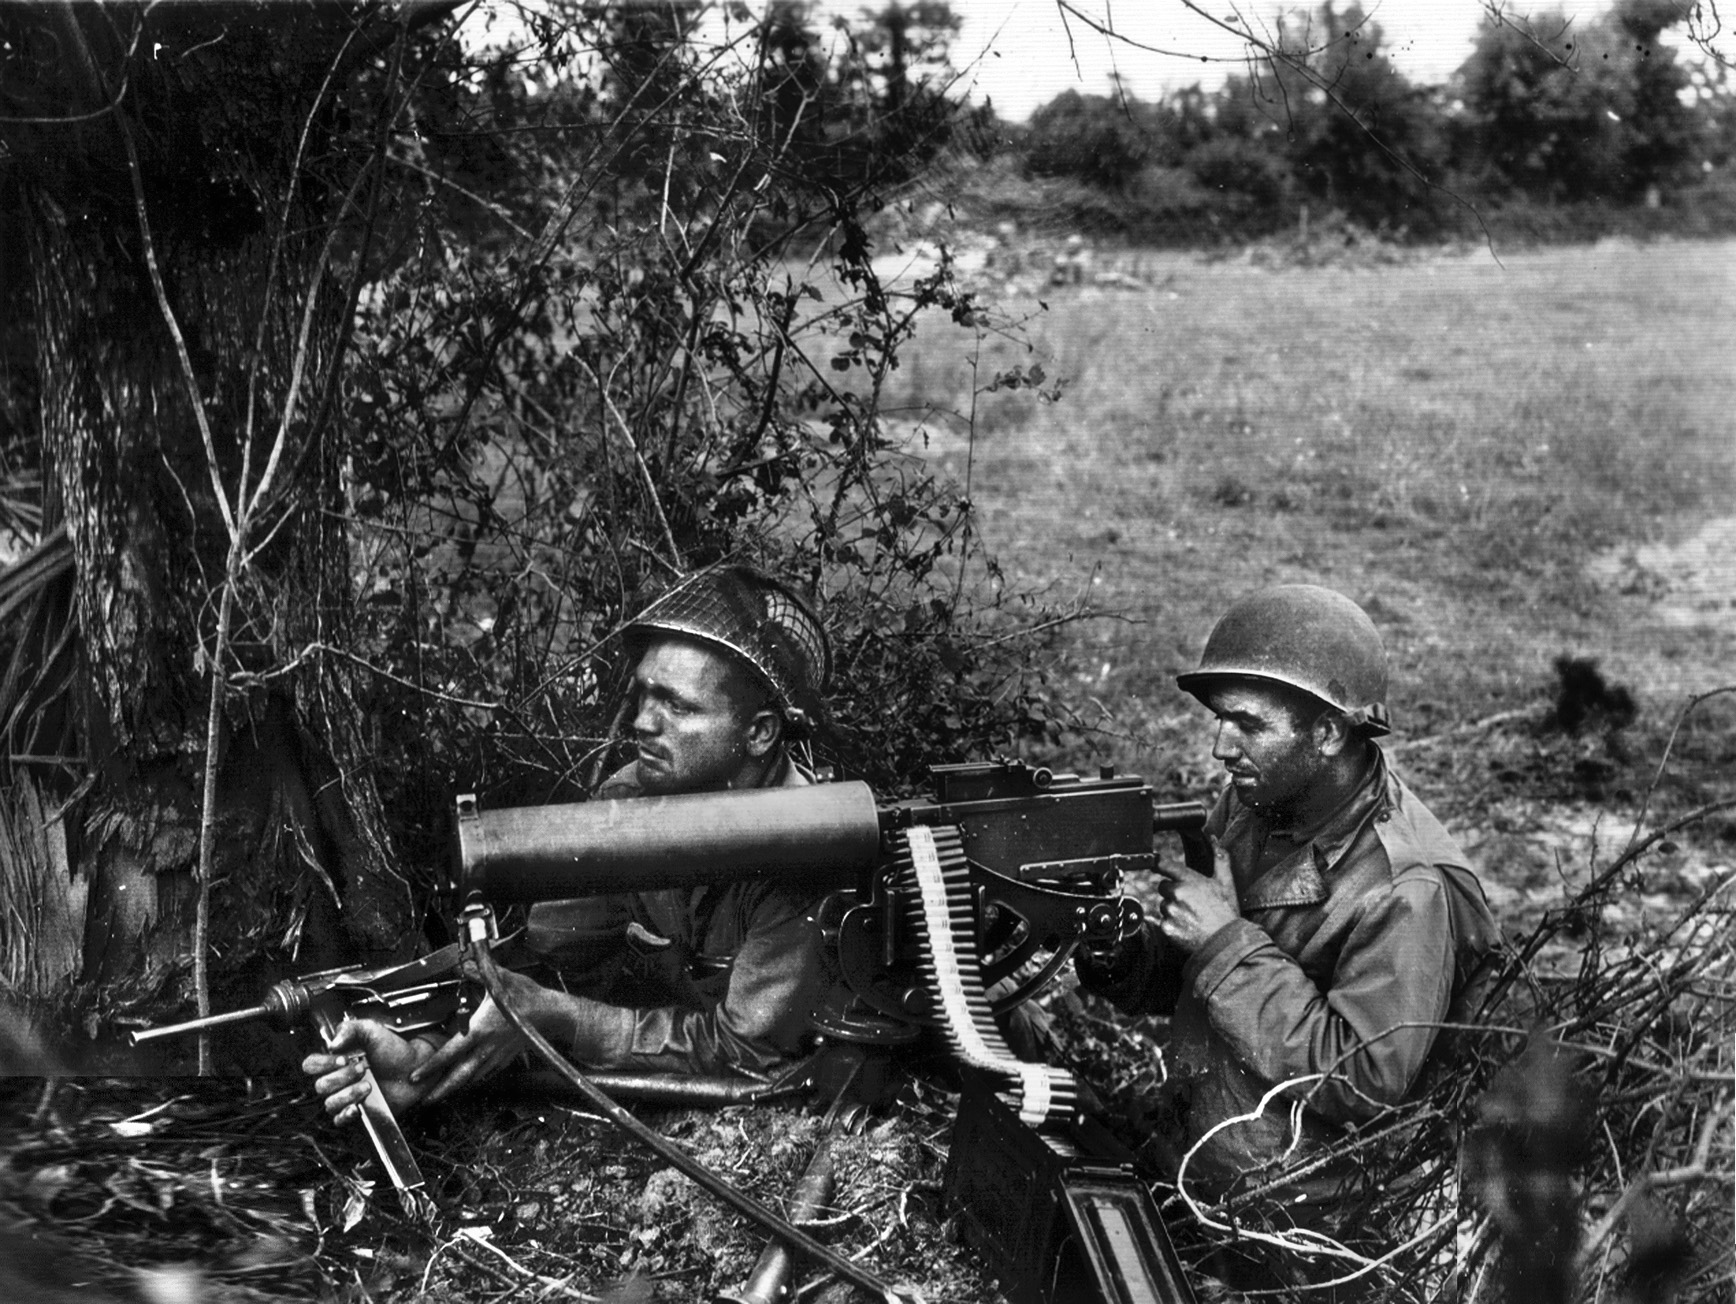 Two American soldiers man their position in Normandy in this photo from June 1944. One soldier is ready for action with a Browning .30-caliber machine gun, while the other is armed with an M3. 